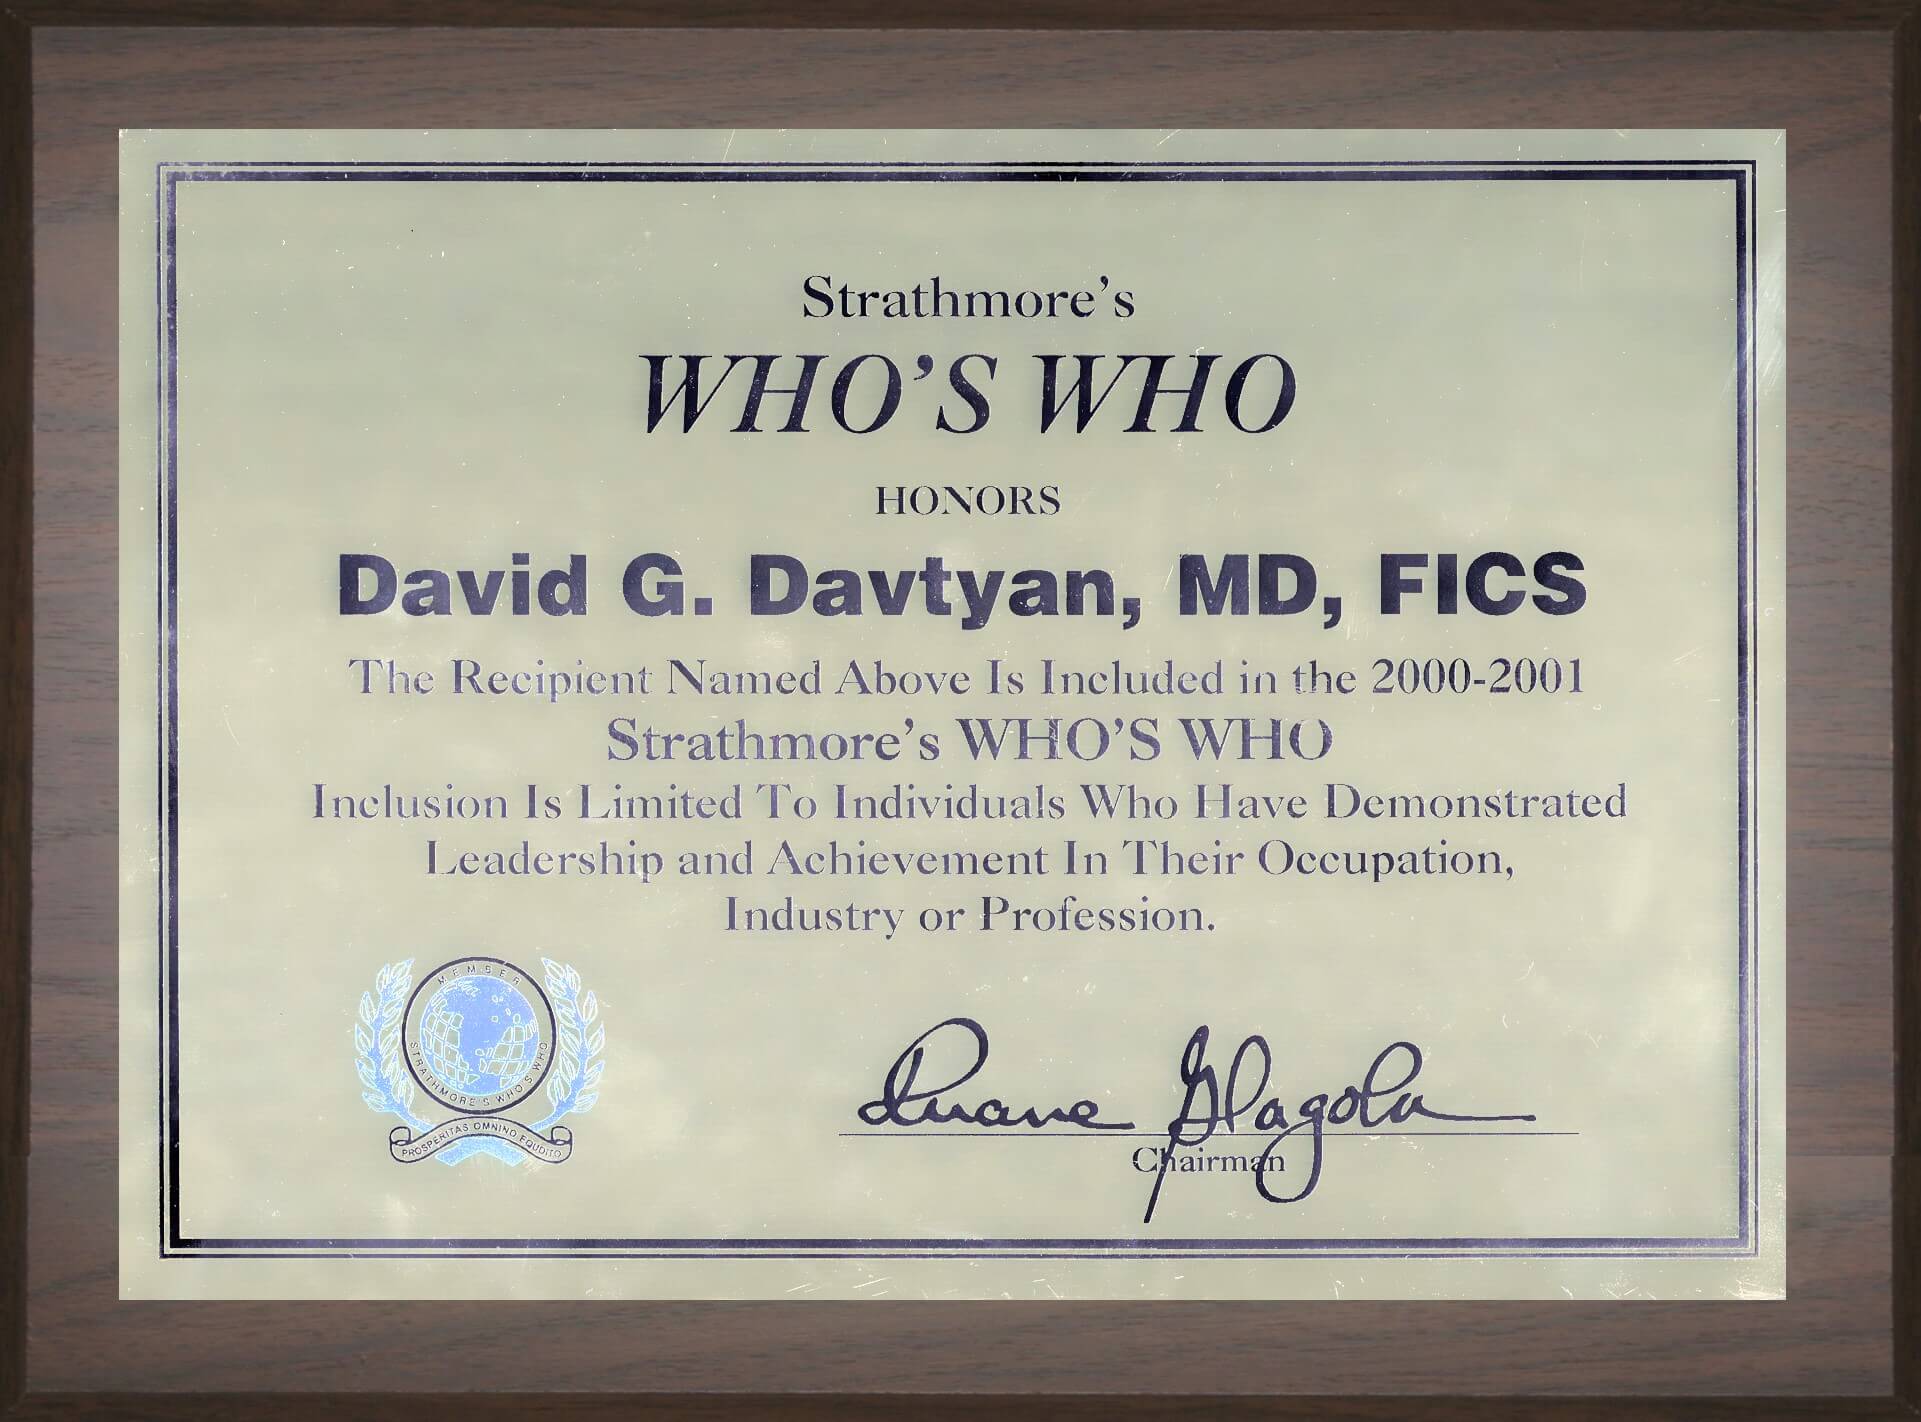 Dr. David Davtyan Strathmore's Who's Who Honors Best Bariatric Weight Loss Surgeon Los Angeles Beverly Hills Glendale Rancho Cucamonga